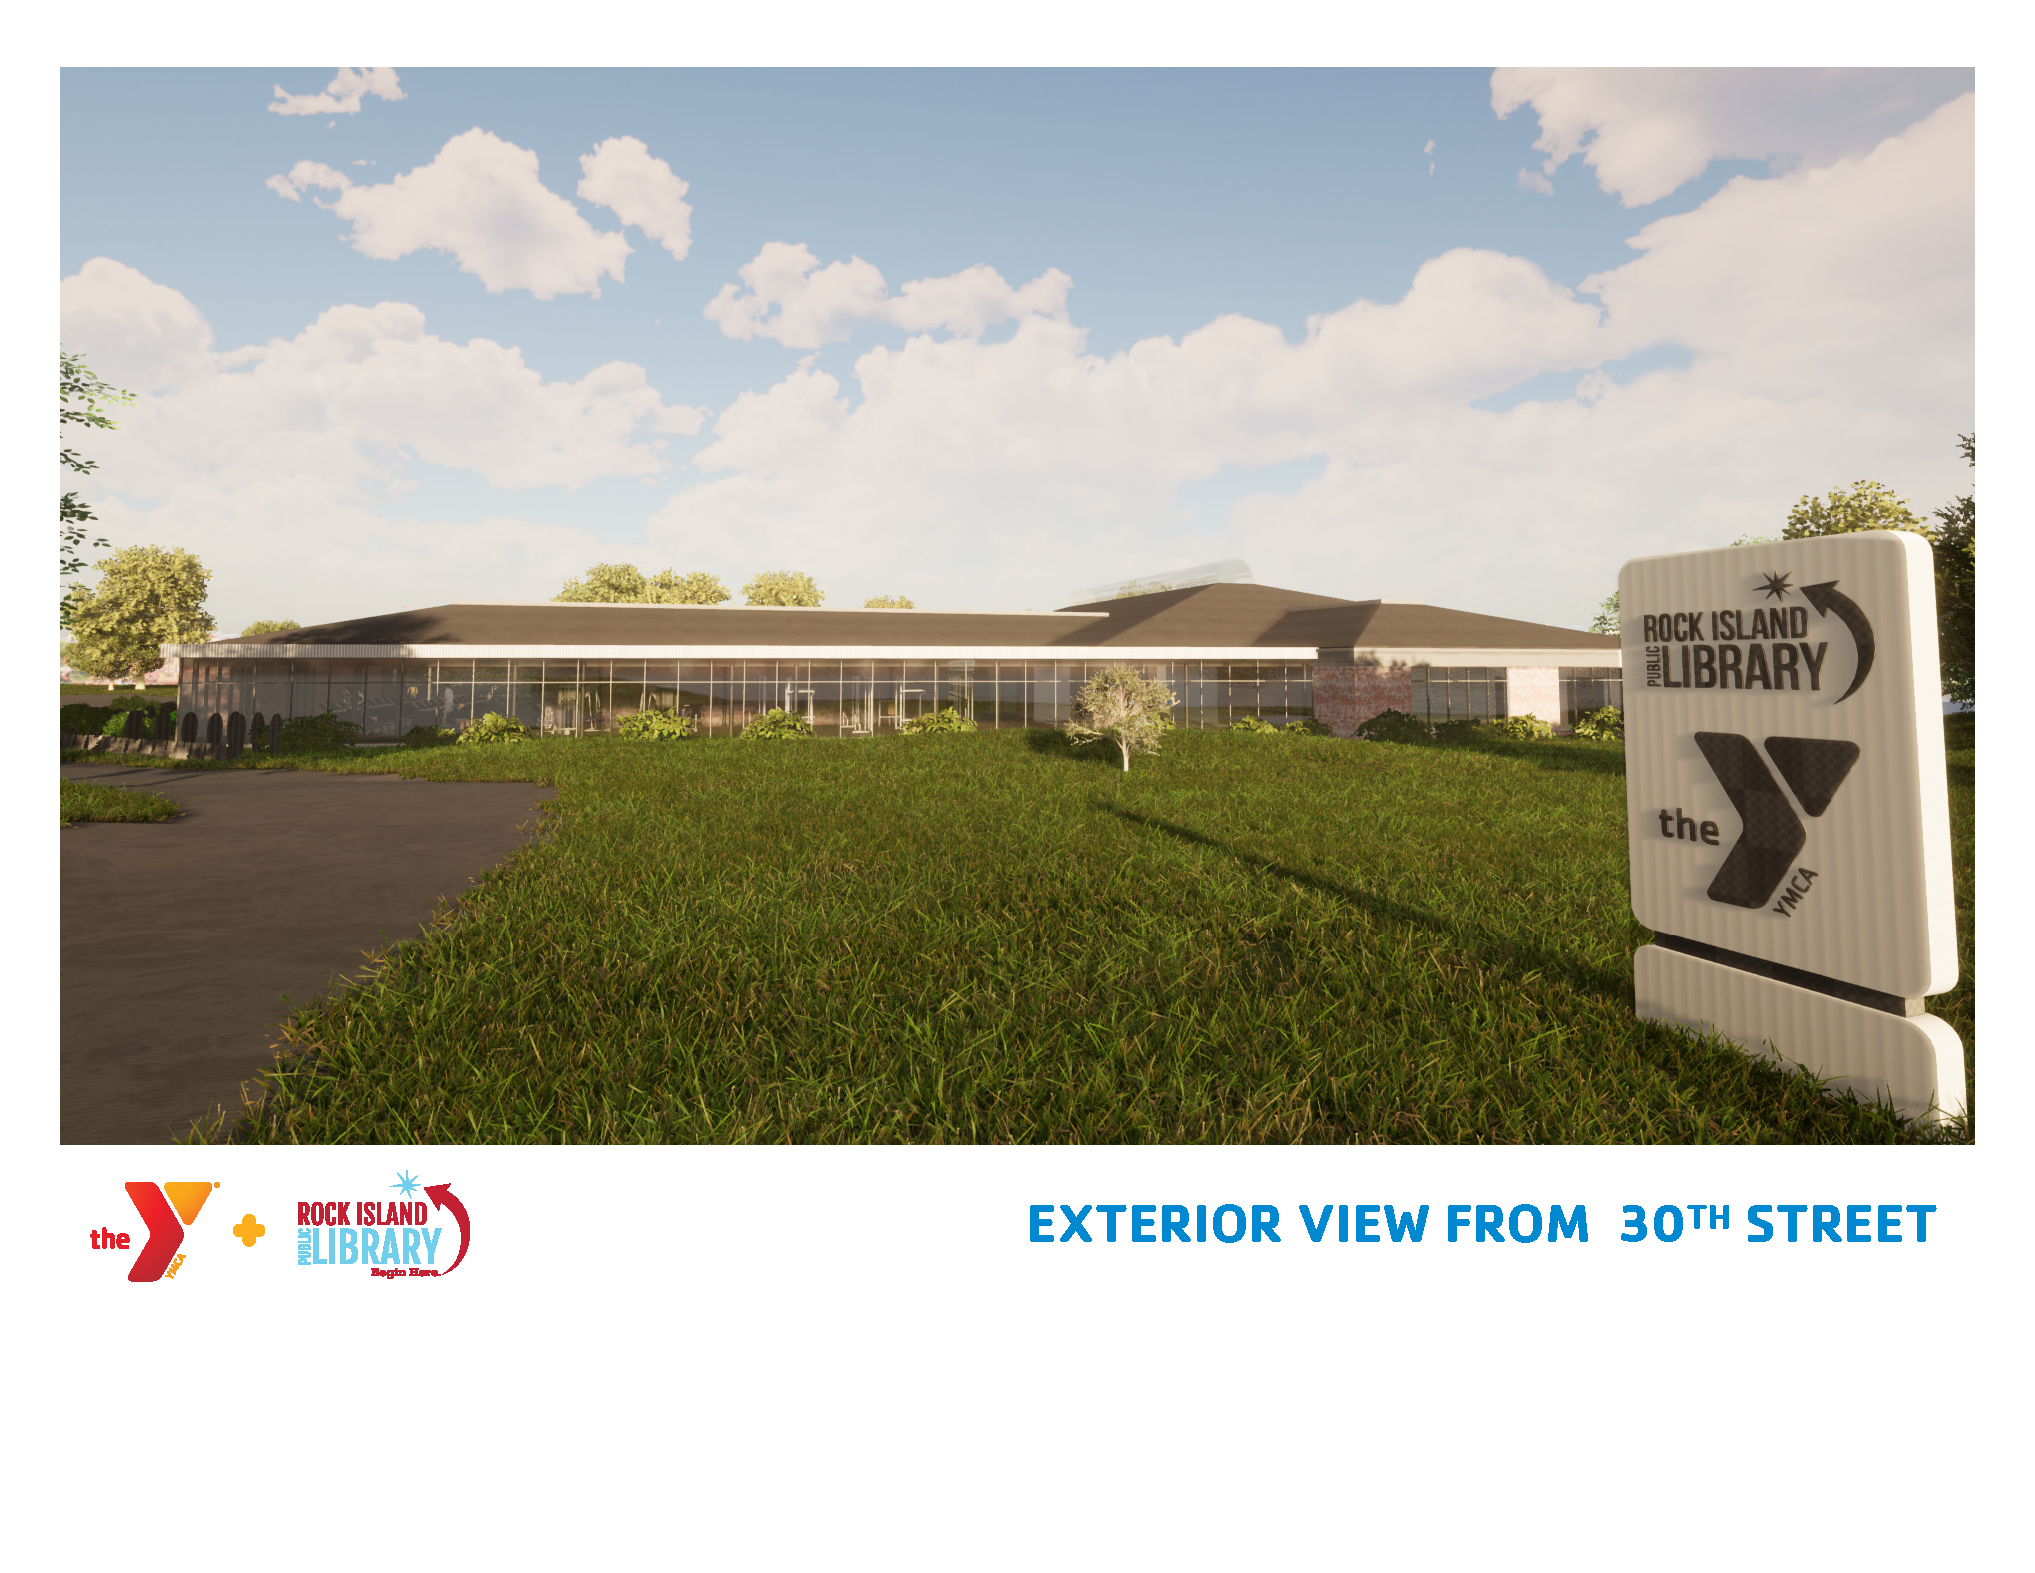 Architectural rendering of entrance sign and new building for Watts-Midtown branch